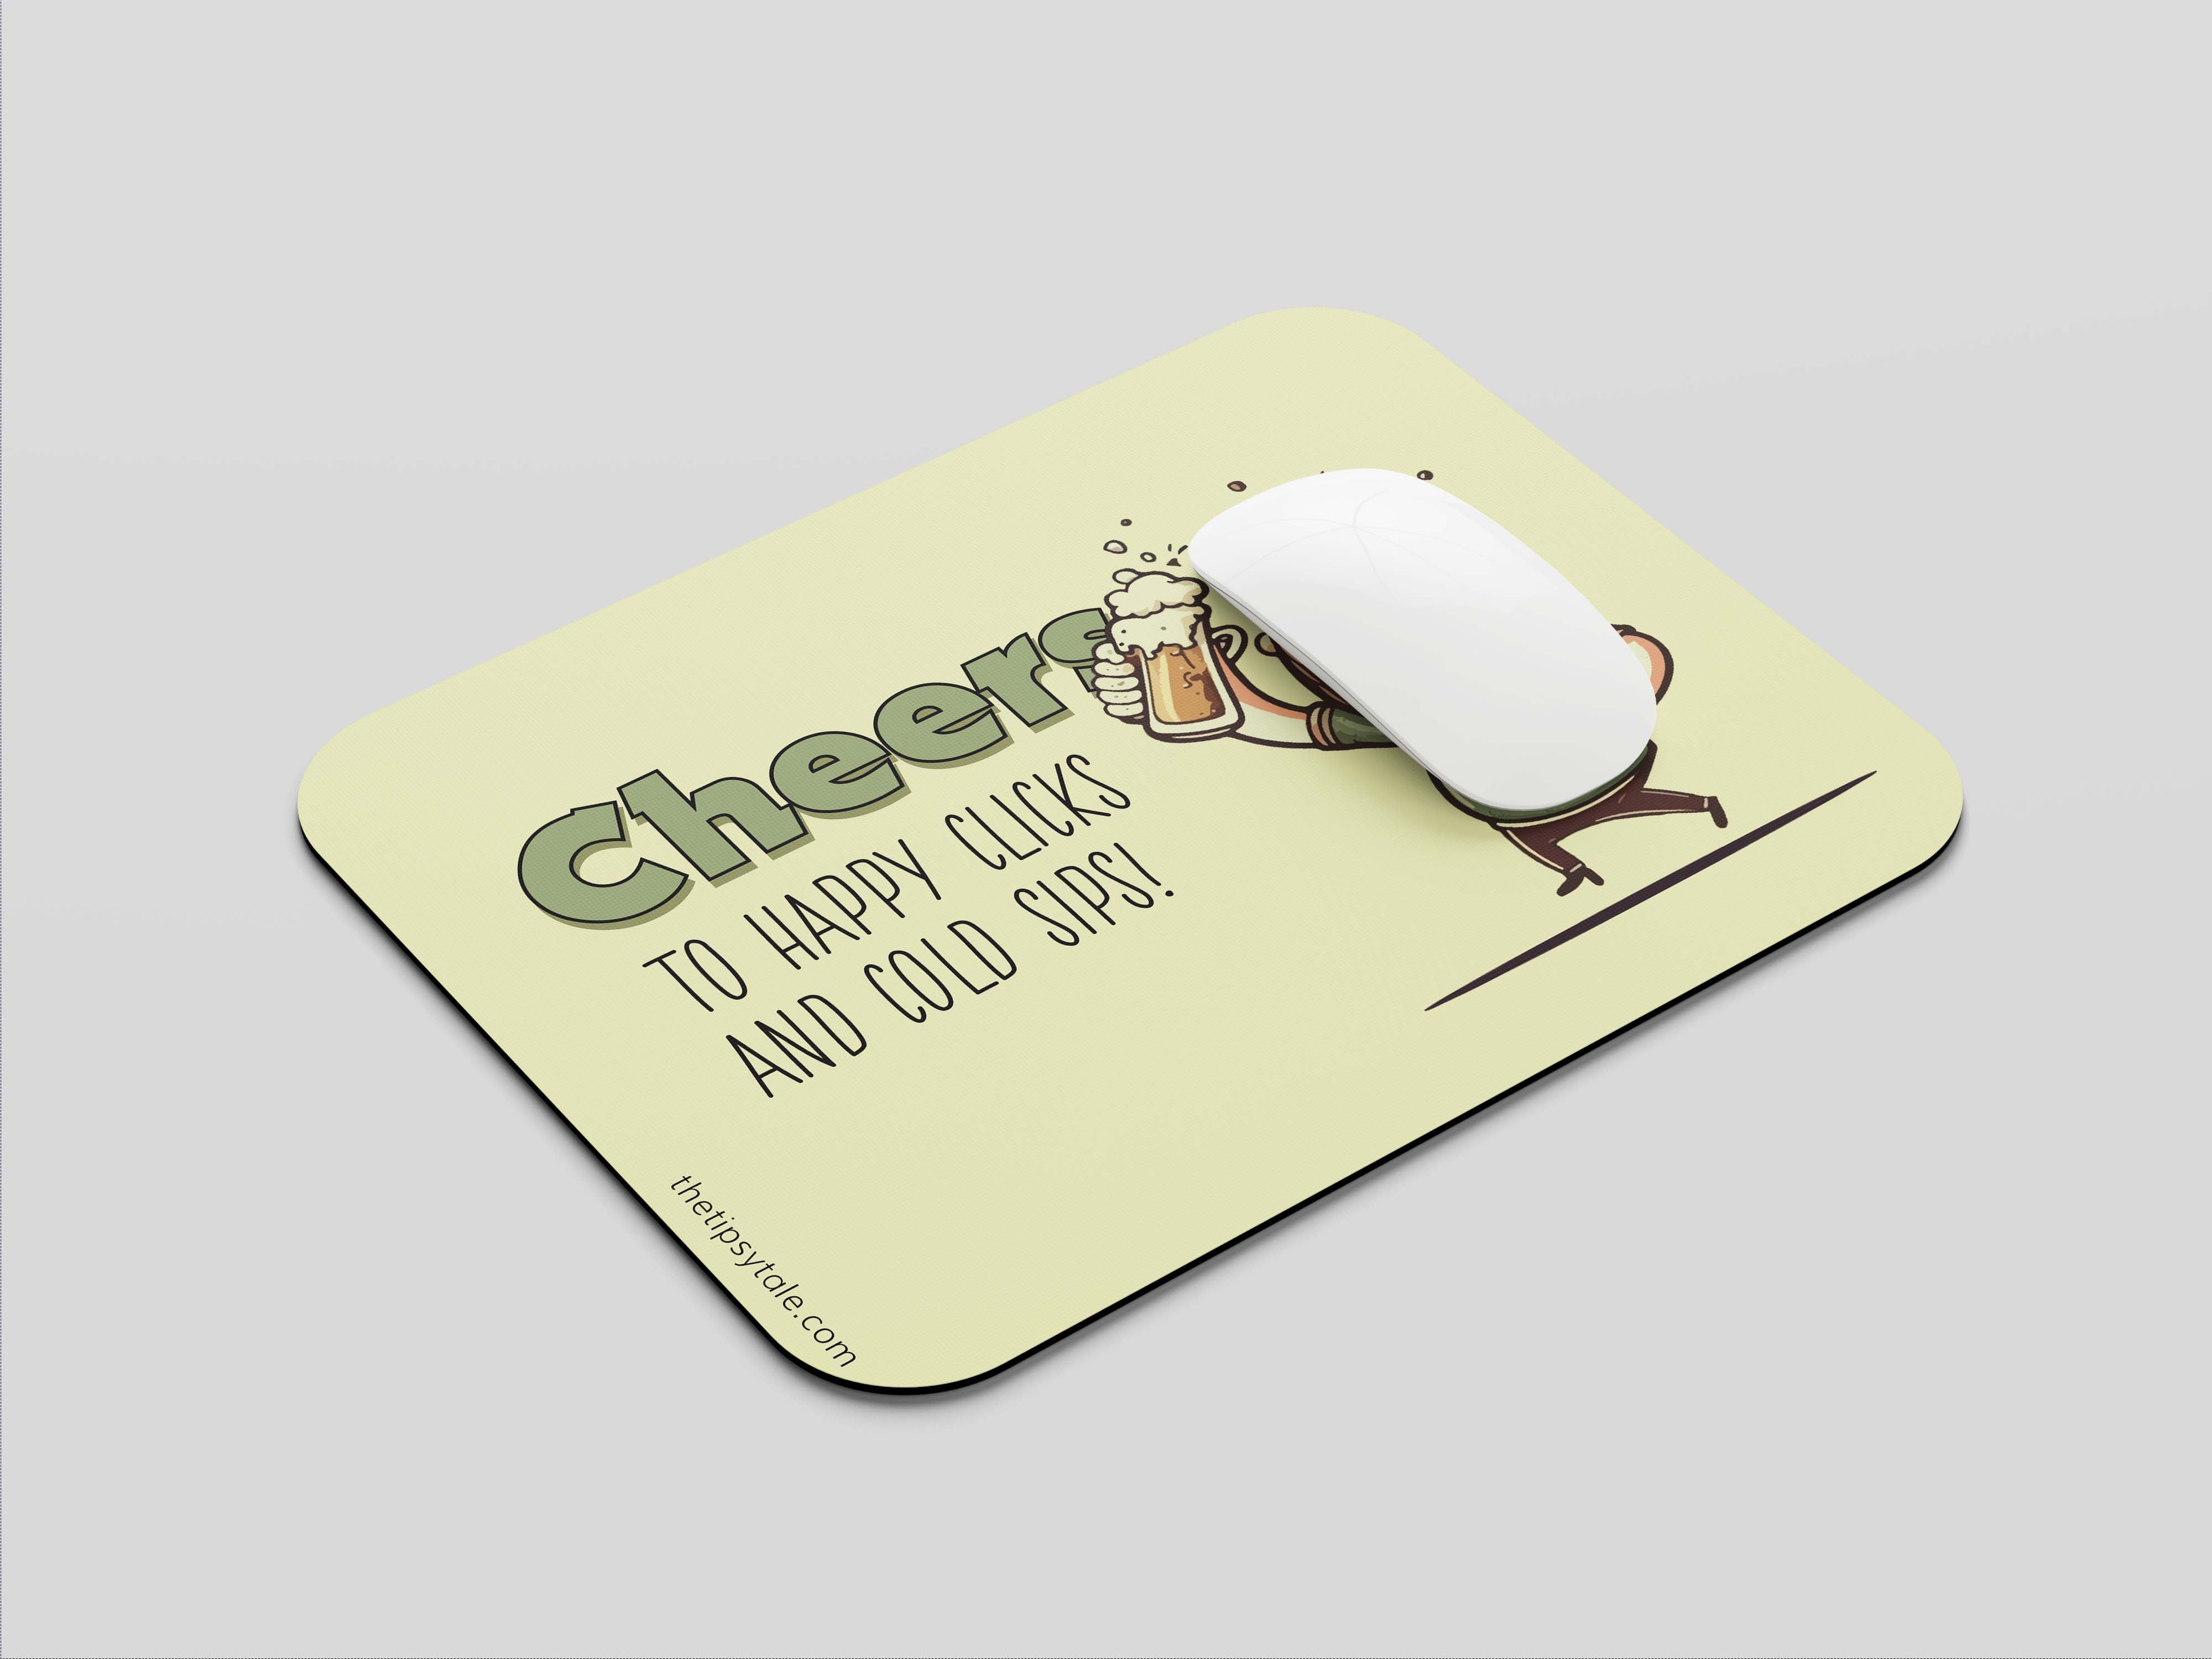 Weekdays Stress Call's for a Cold Sip of Brain Freezers: Fun Mouse Pad